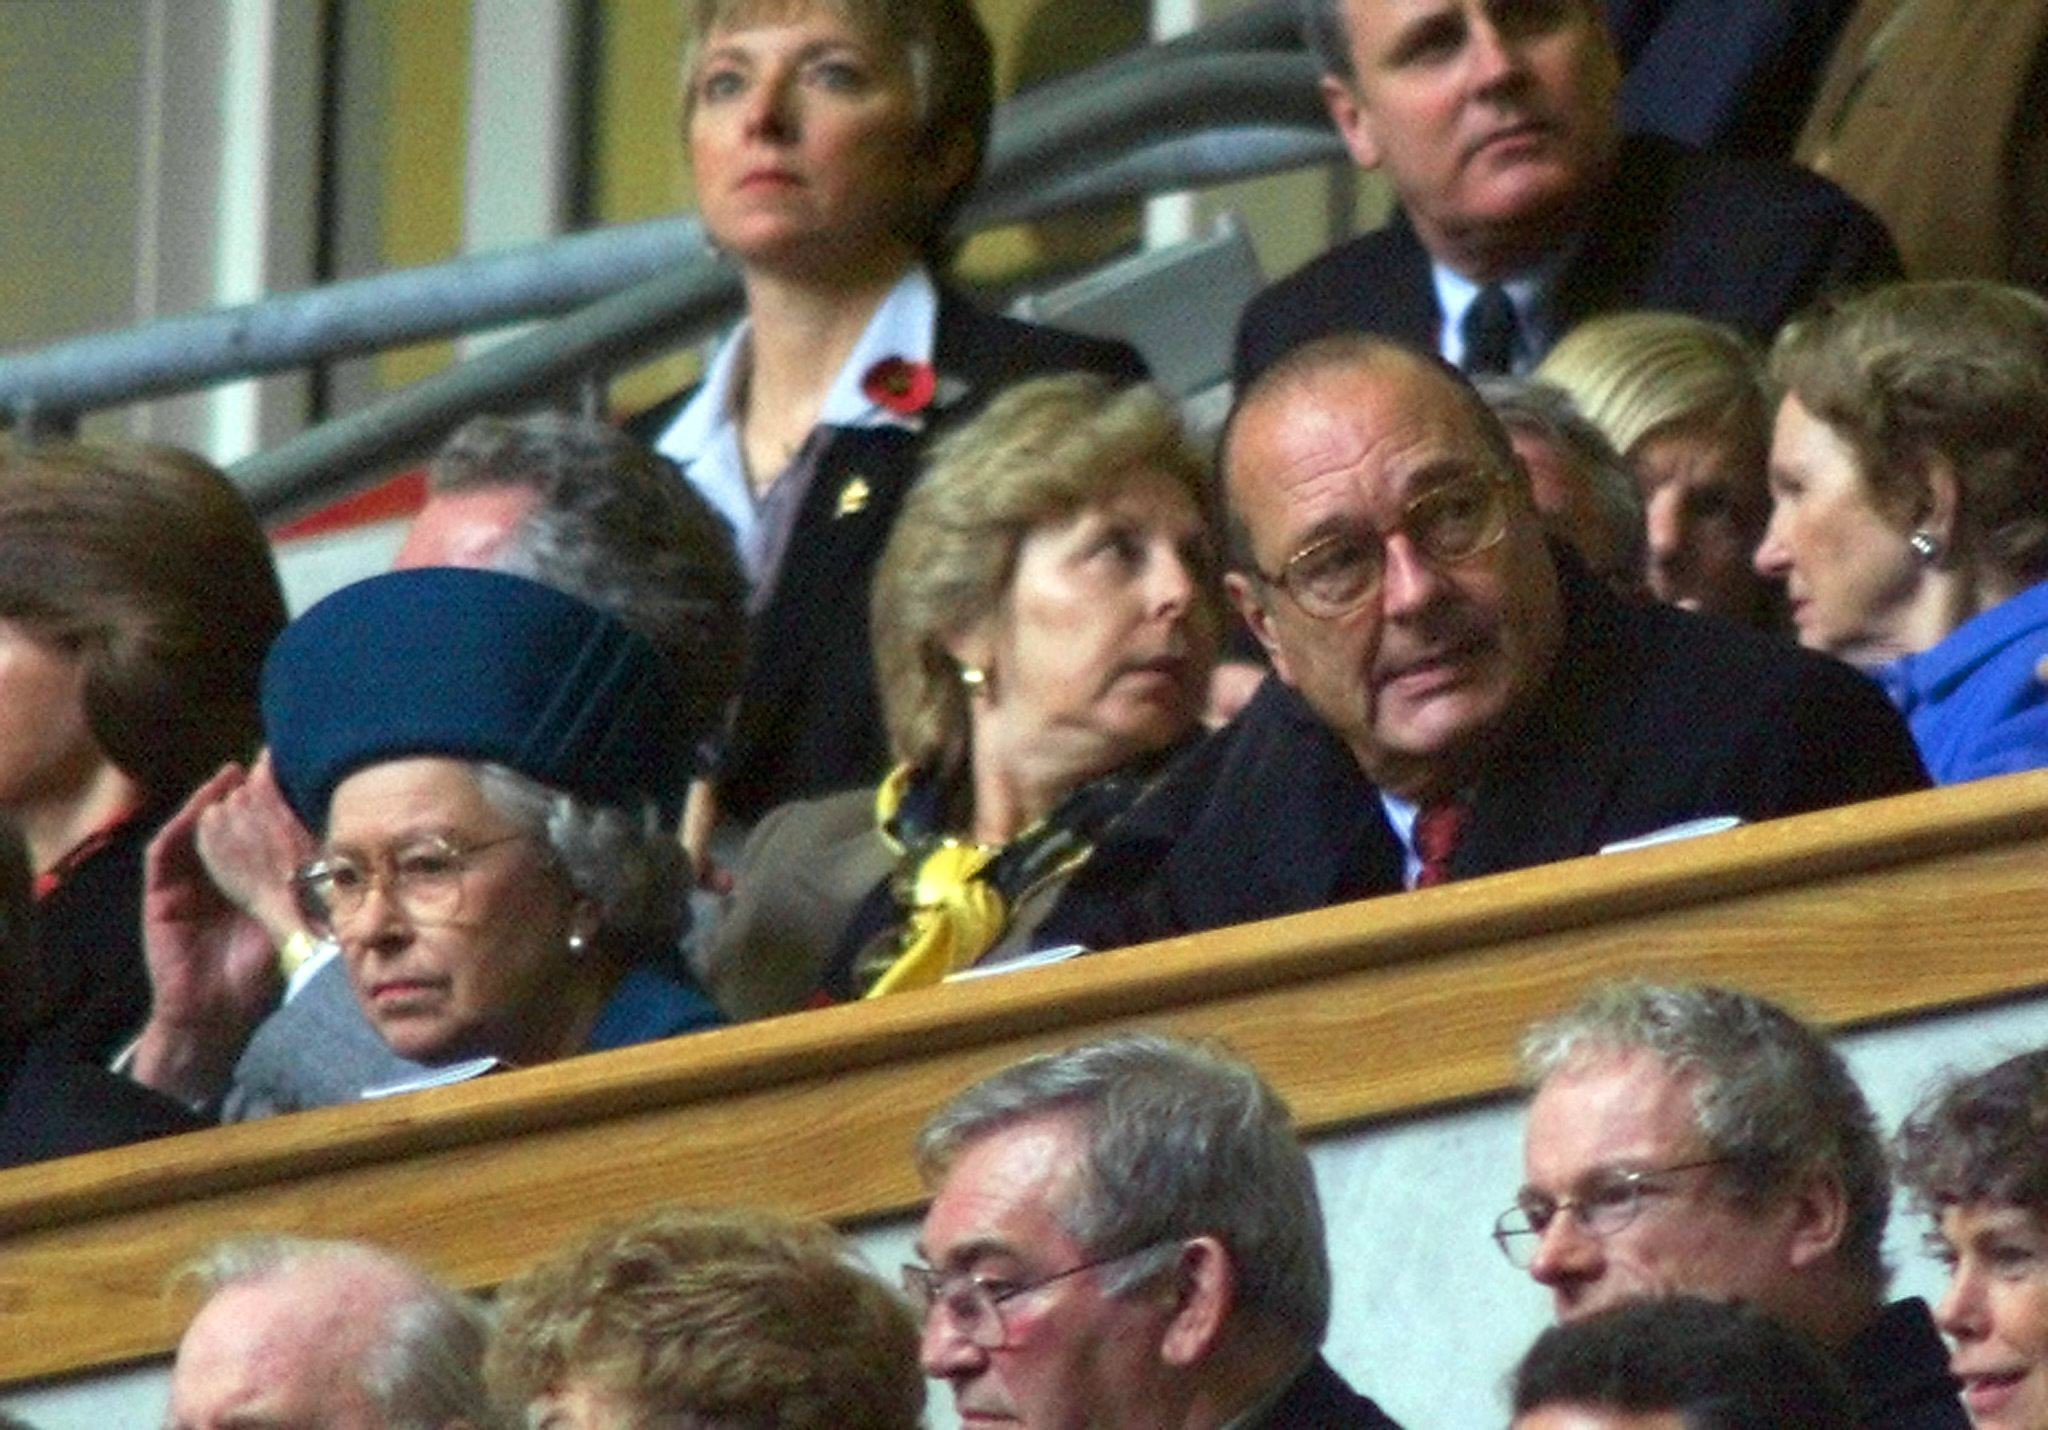 Queen Elizabeth II attends the 1999 Rugby Union World Cup Final between France and Australia in Cardiff ©Getty Images